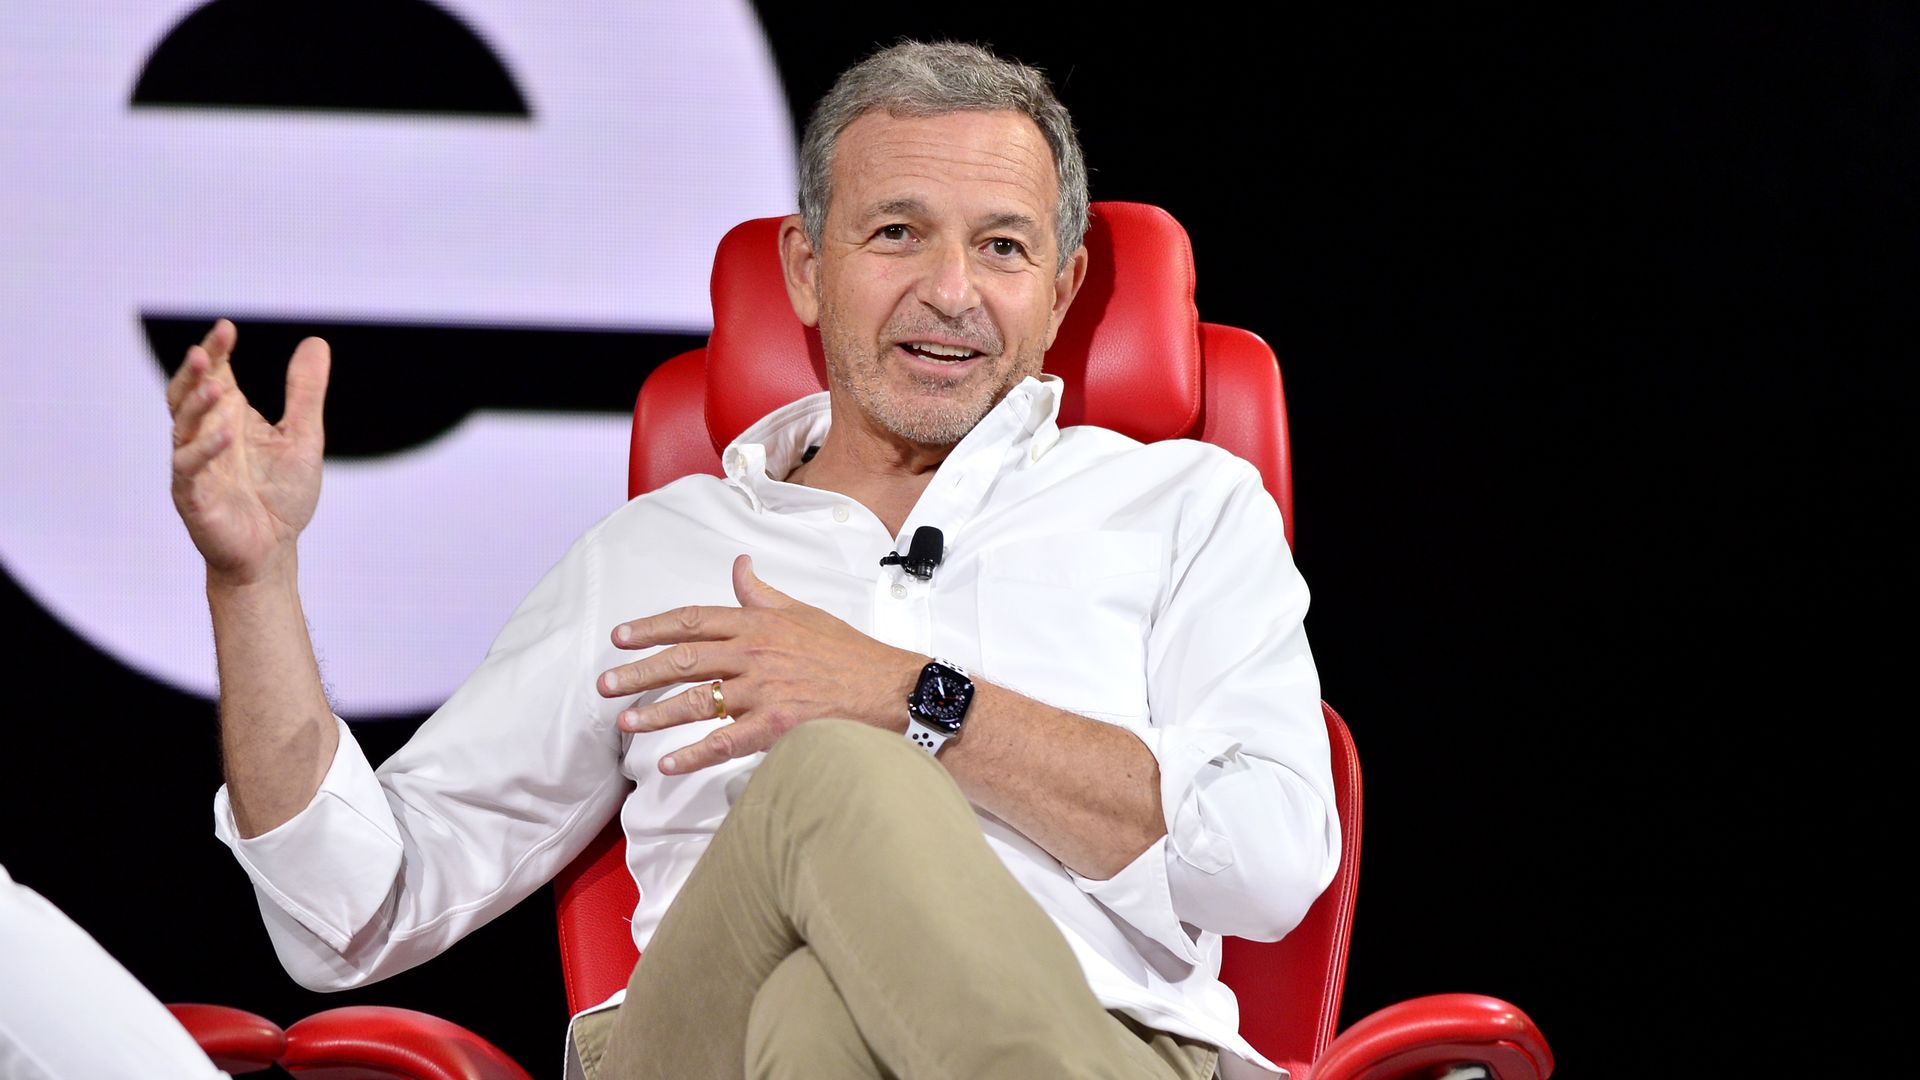 The Walt Disney Company Former CEO and Chairman Robert Iger speaks onstage during Vox Media's 2022 Code Conference - Day 2 on September 07, 2022 in Beverly Hills, California. 